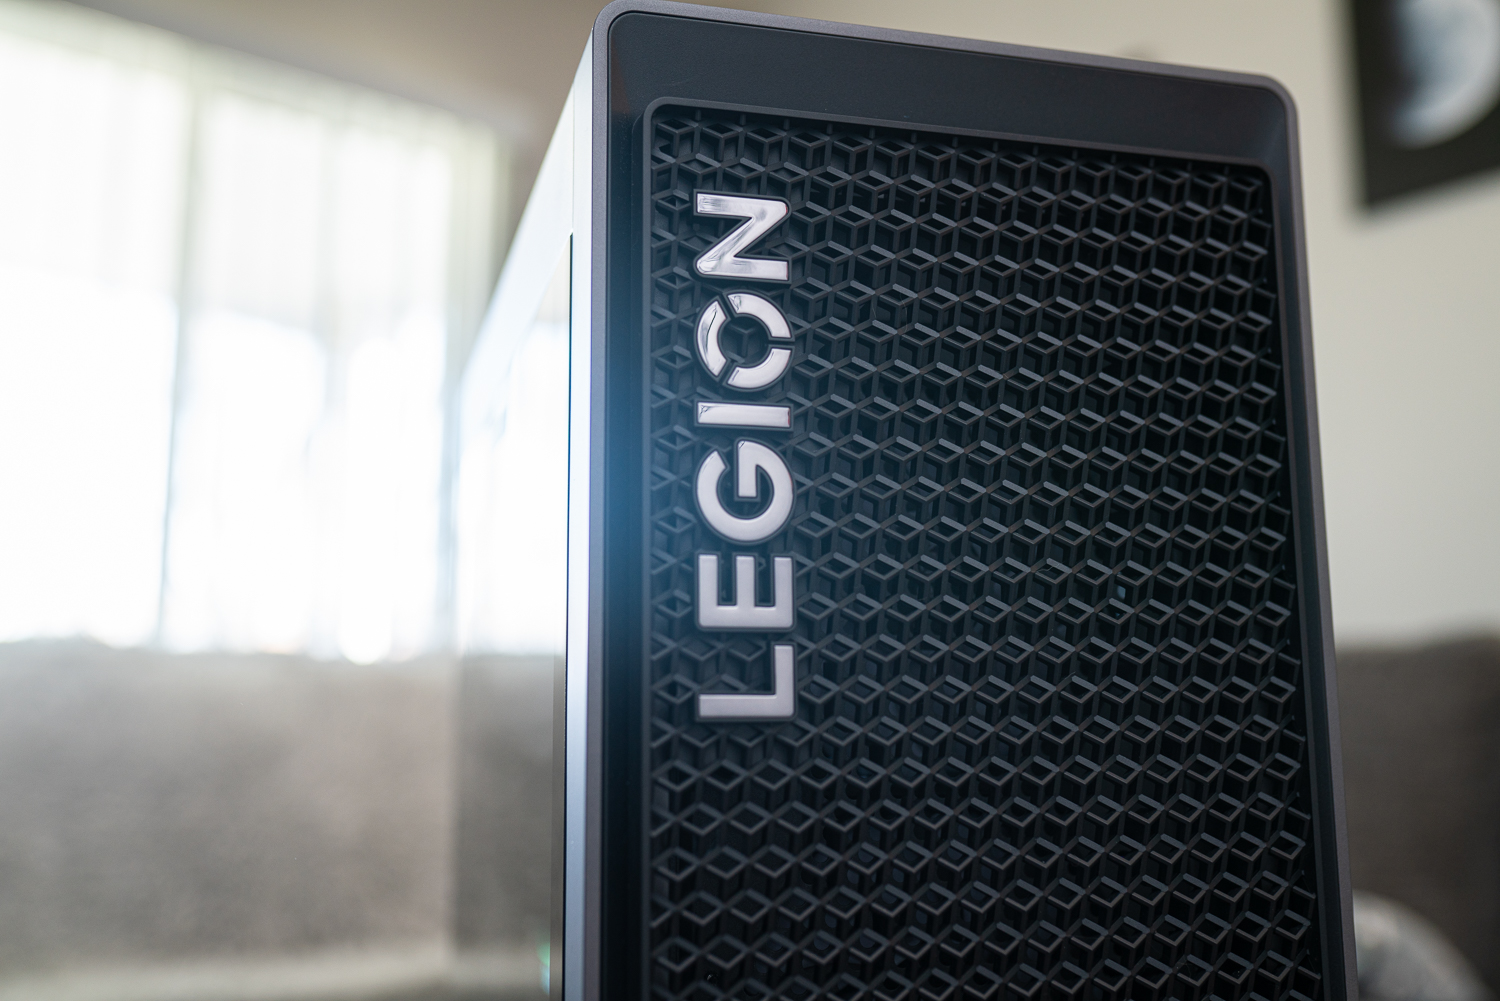 This is the best Lenovo gaming PC you can buy